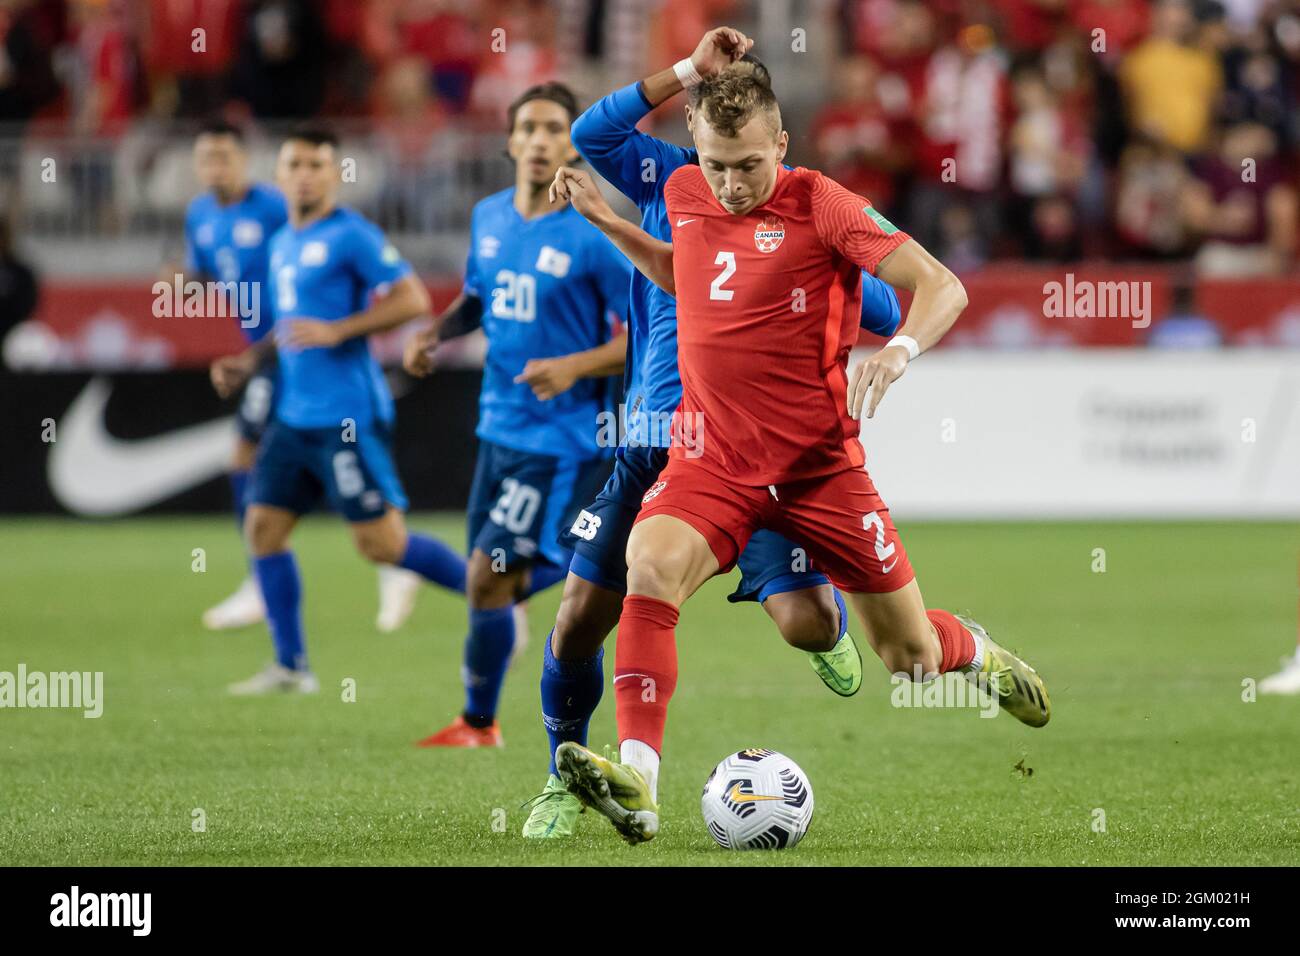 Toronto, Canada, September 8, 2021: Alistair Johnston (No.2) of Team Canada compete for the ball against Jairo Henríquez (No.17) of Team El Salvador during the CONCACAF FIFA World Cup Qualifying 2022 match at BMO Field in Toronto, Canada. Canada won the match 3-0. Stock Photo